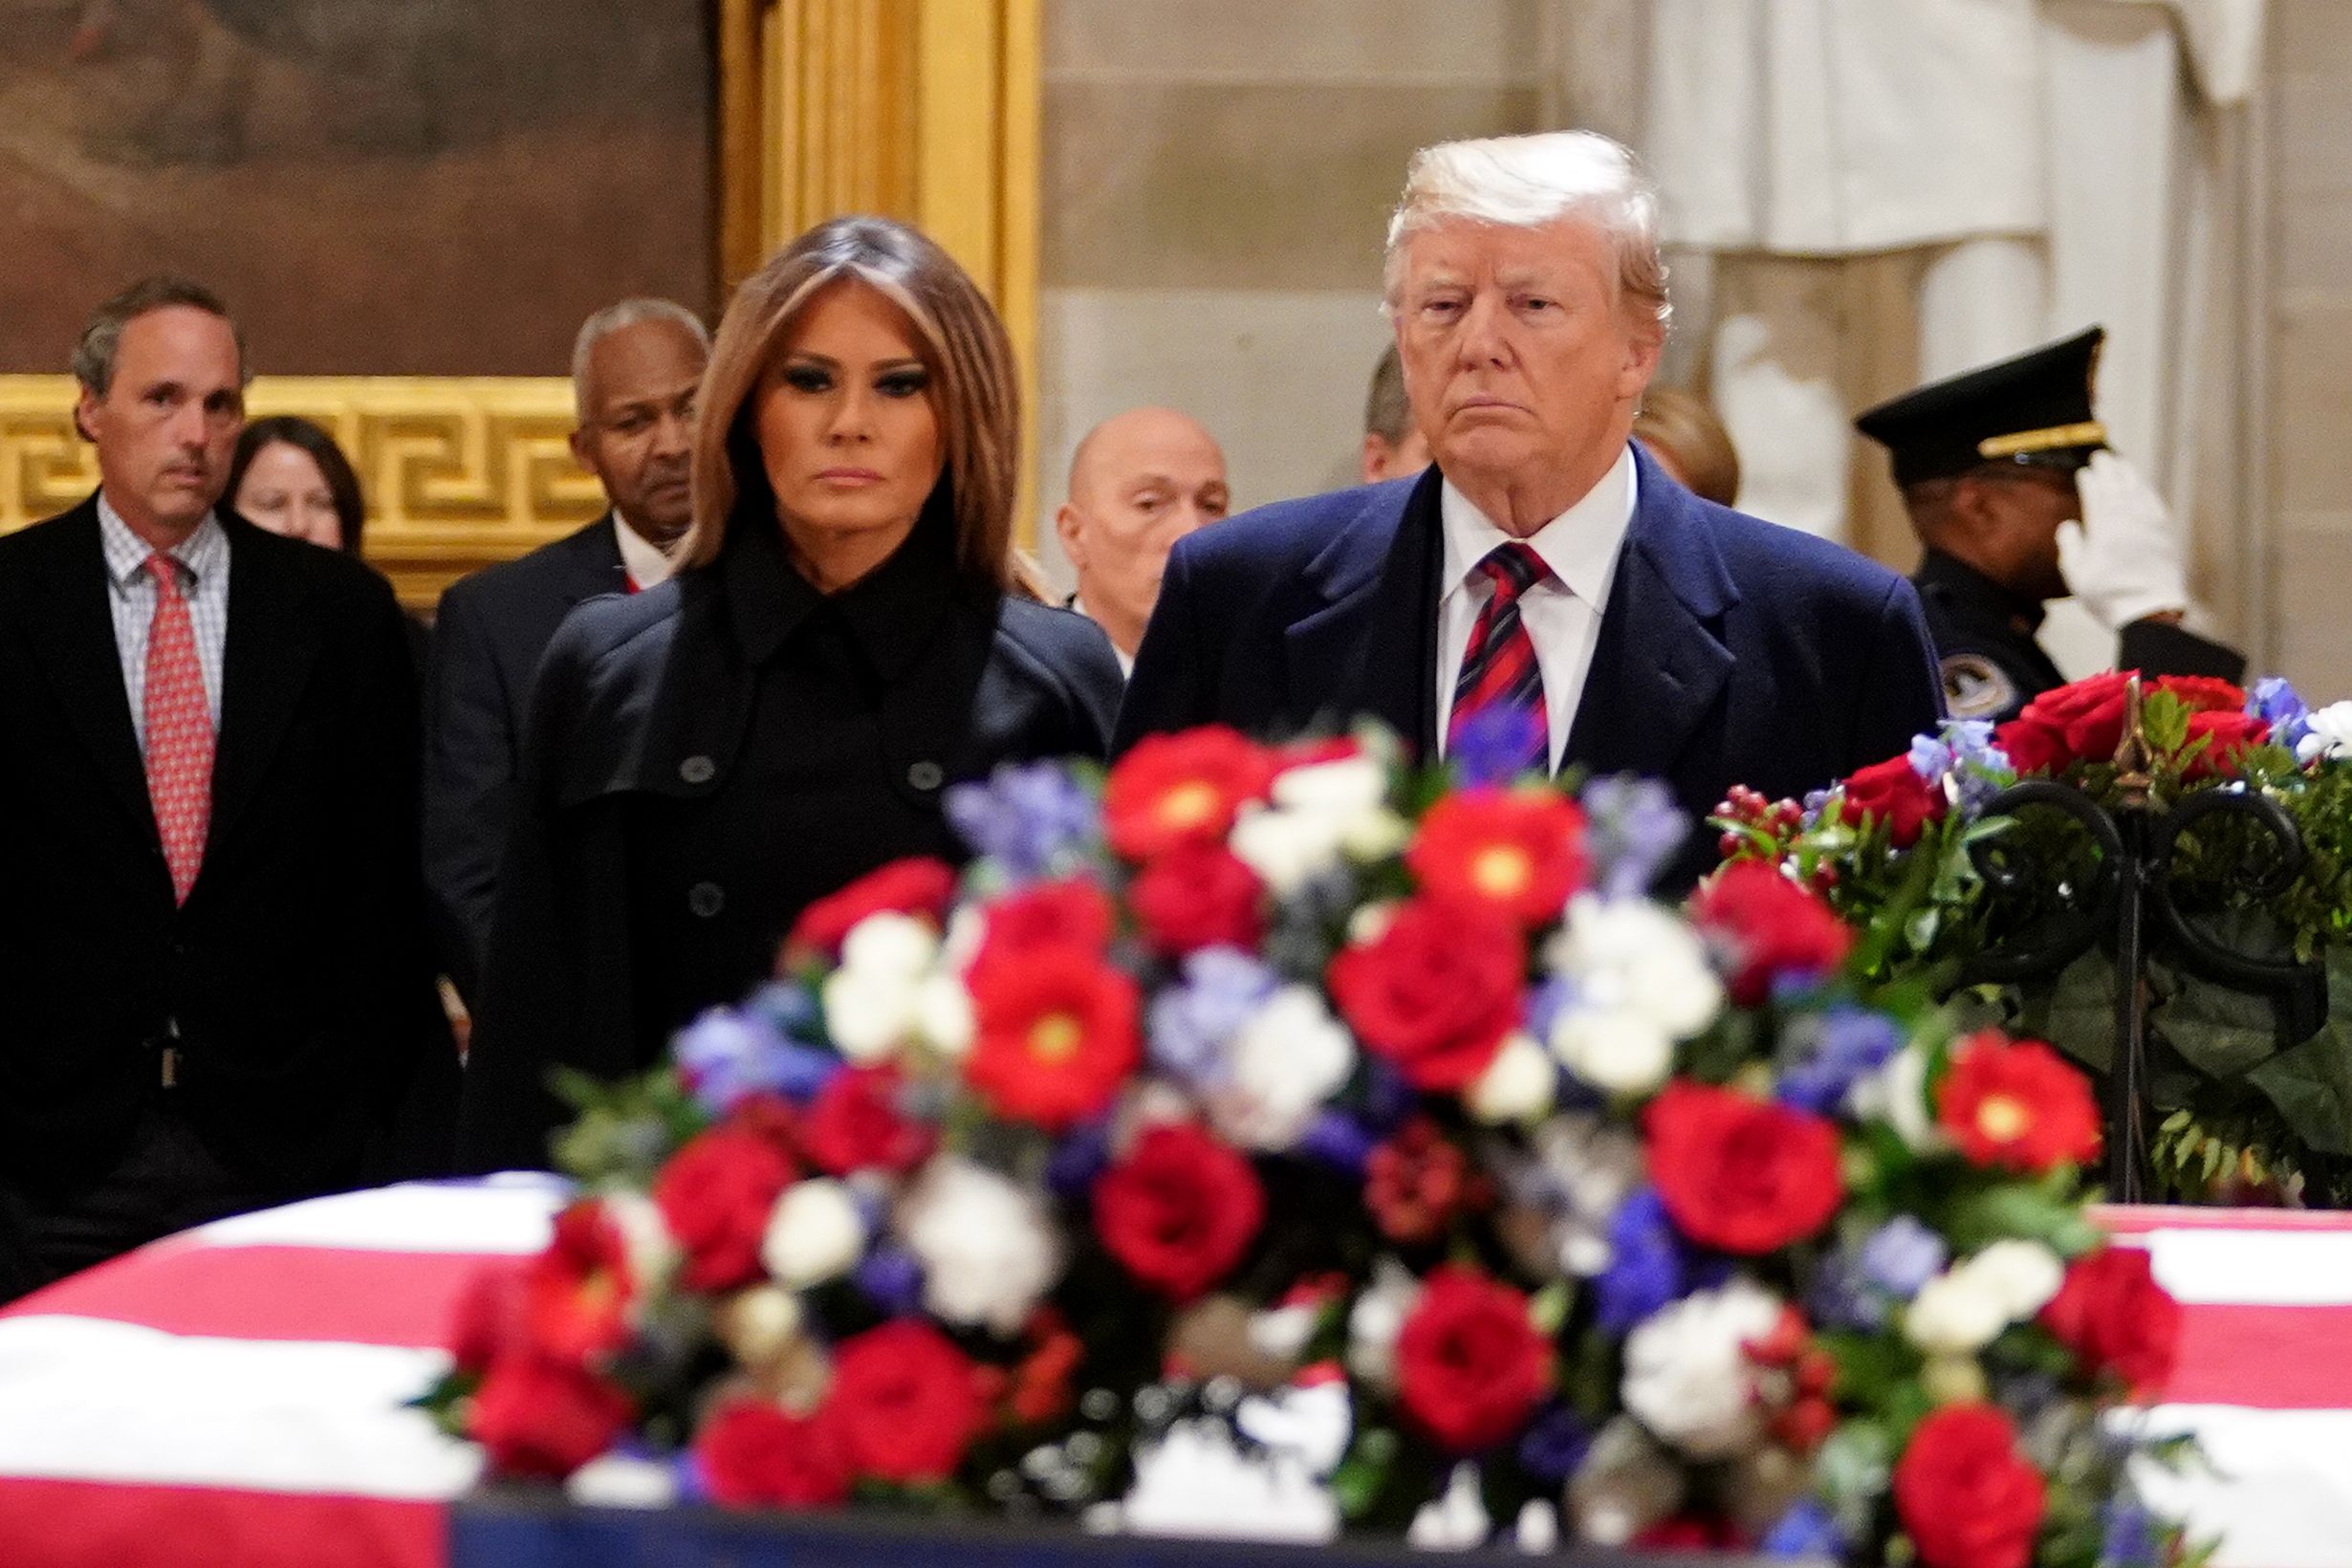  President Donald Trump and First Lady Melania Trump pay their respects as US president George H. W. Bush lies in state in the Rotunda of the US Capitol 